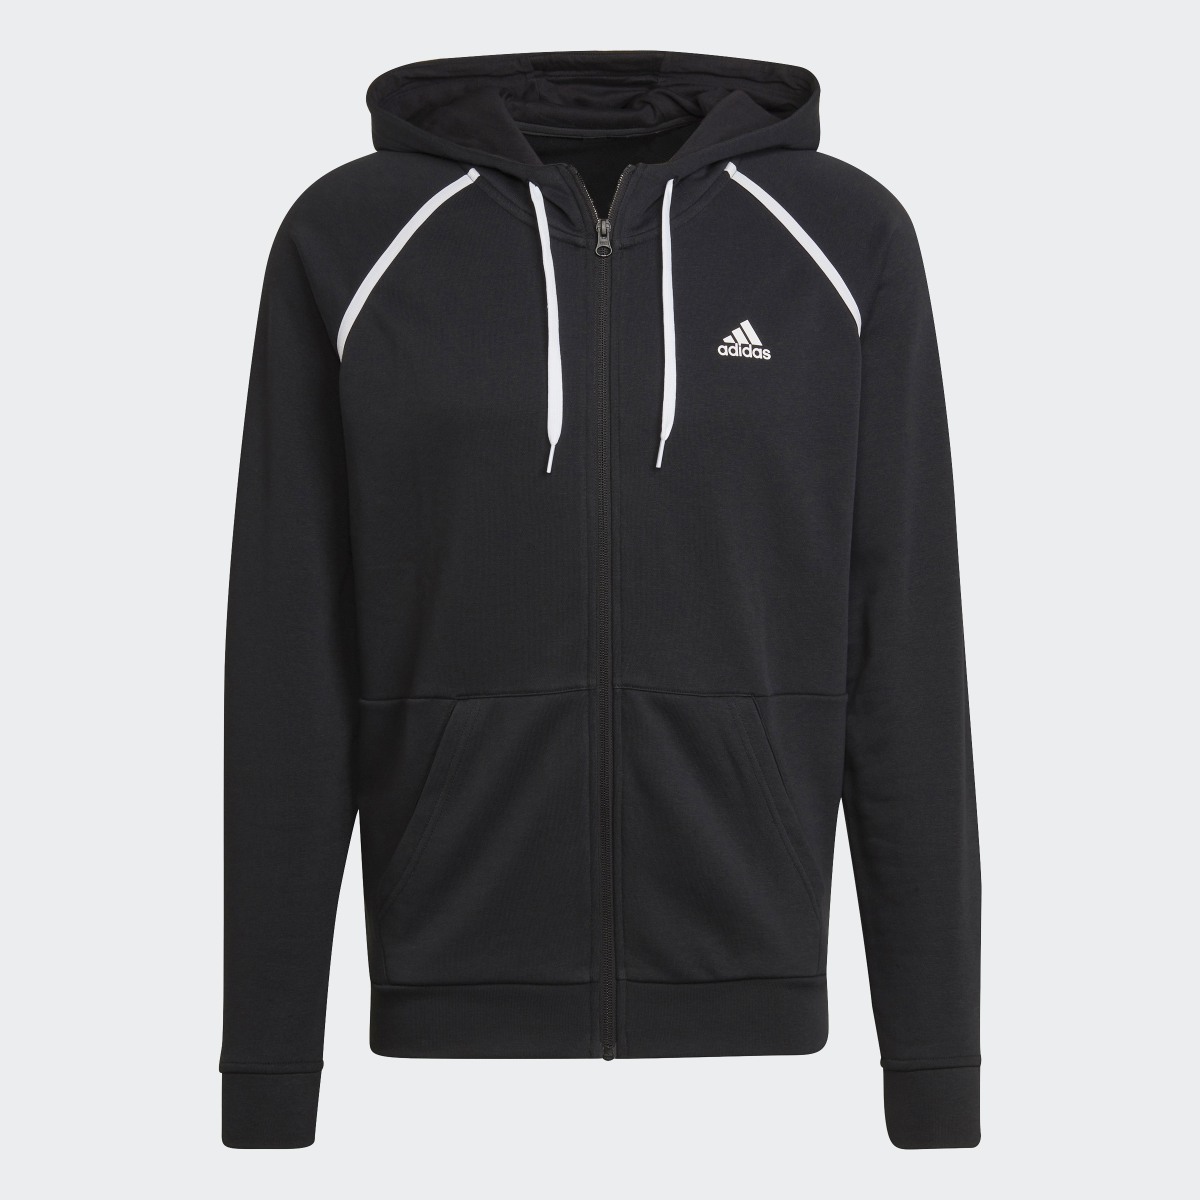 Adidas Cotton Piping Tracksuit. 6